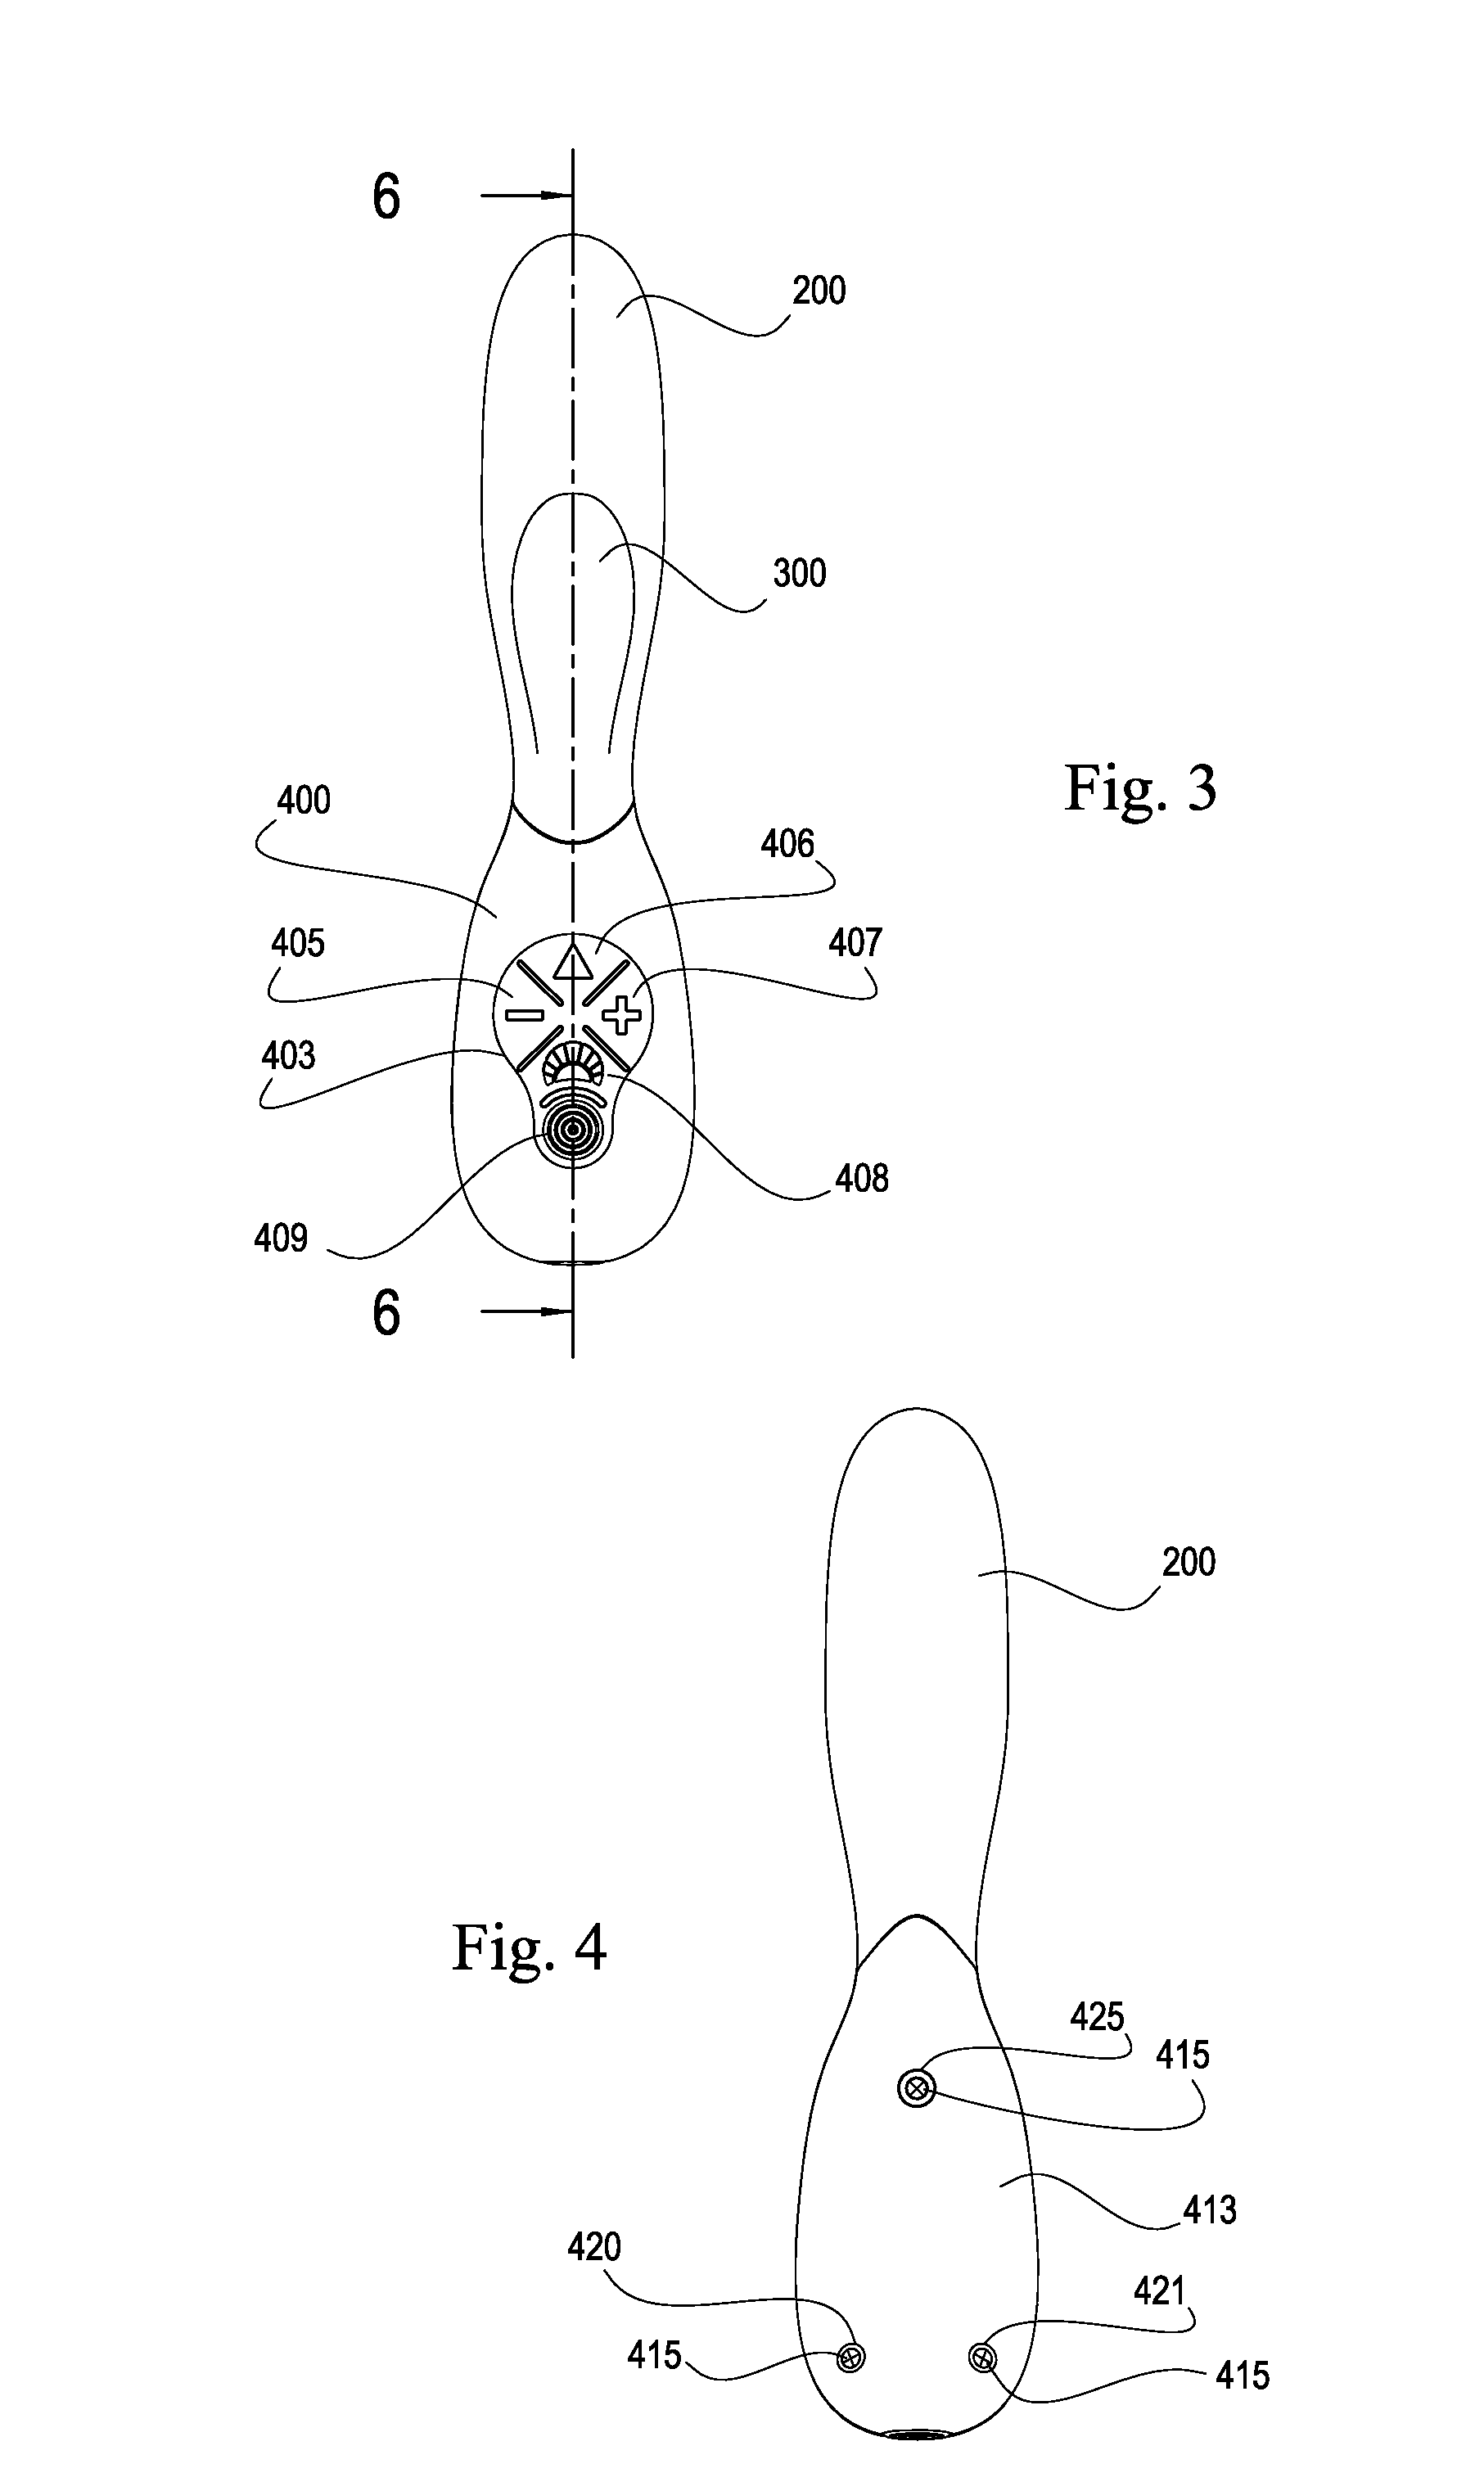 Sexual stimulation device using light therapy